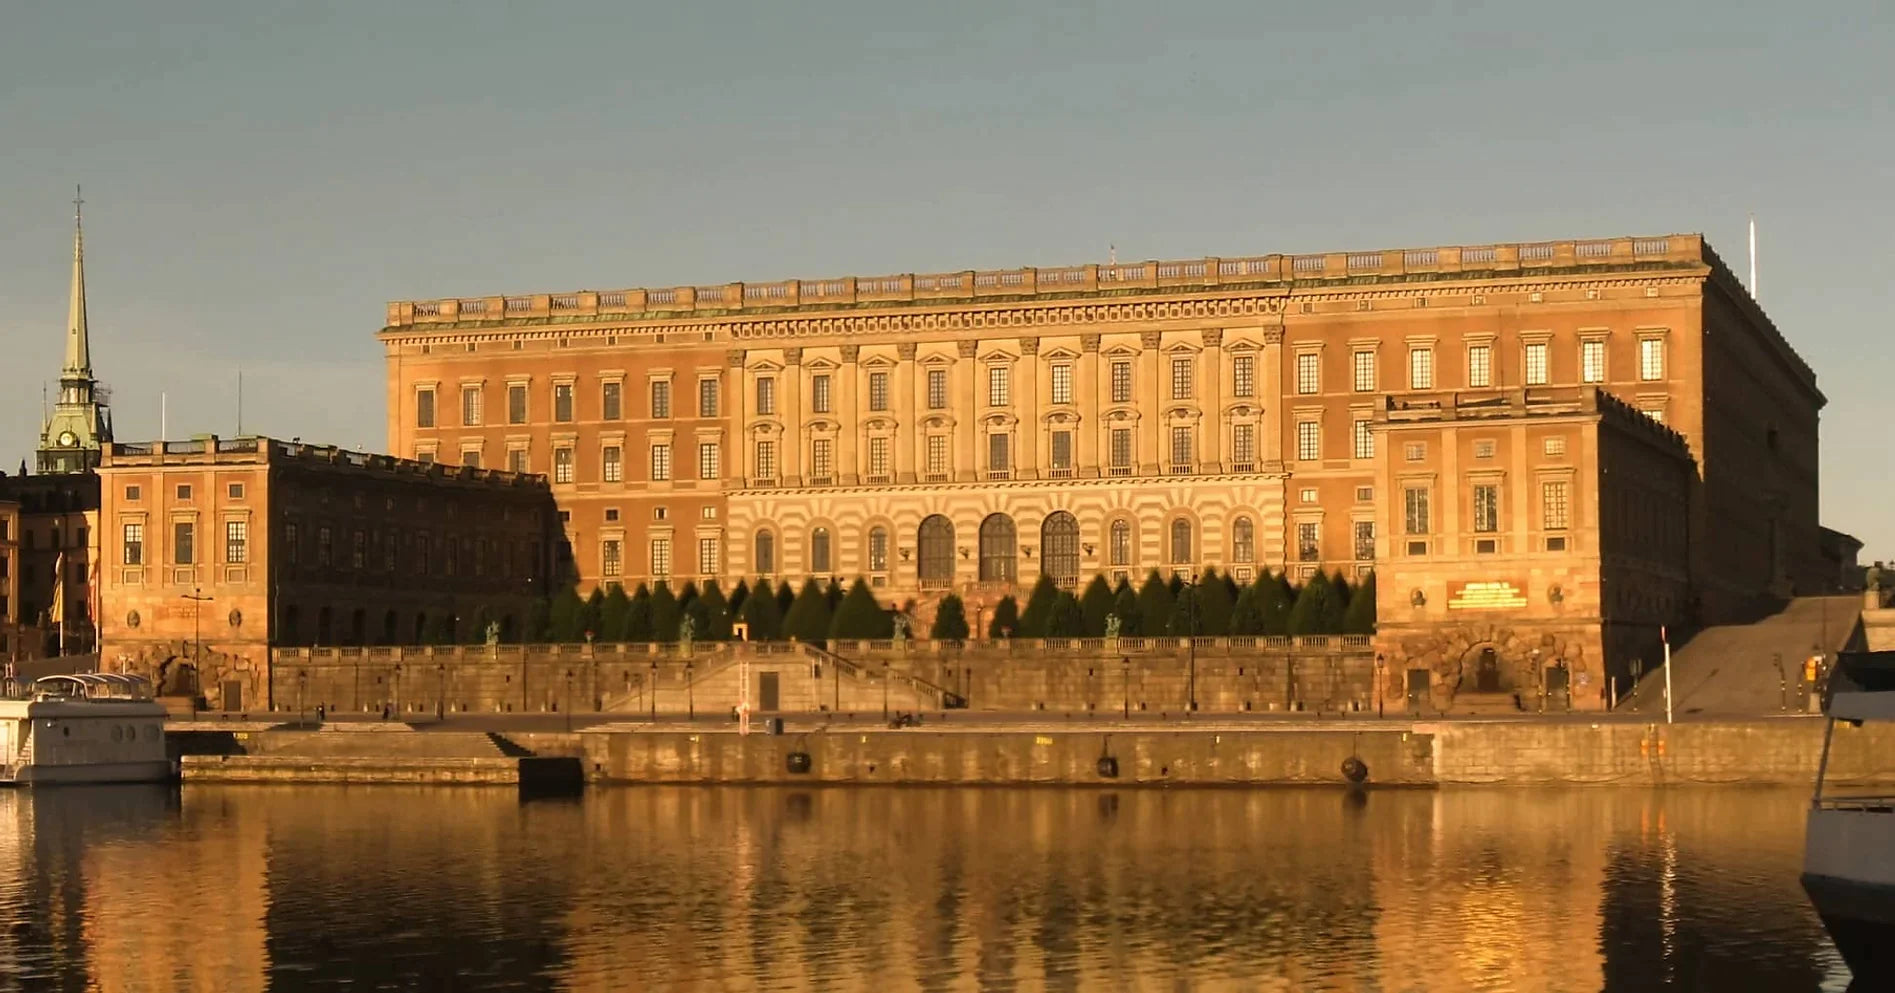 Stockholm (Royal Palace) - An outdoor escape room